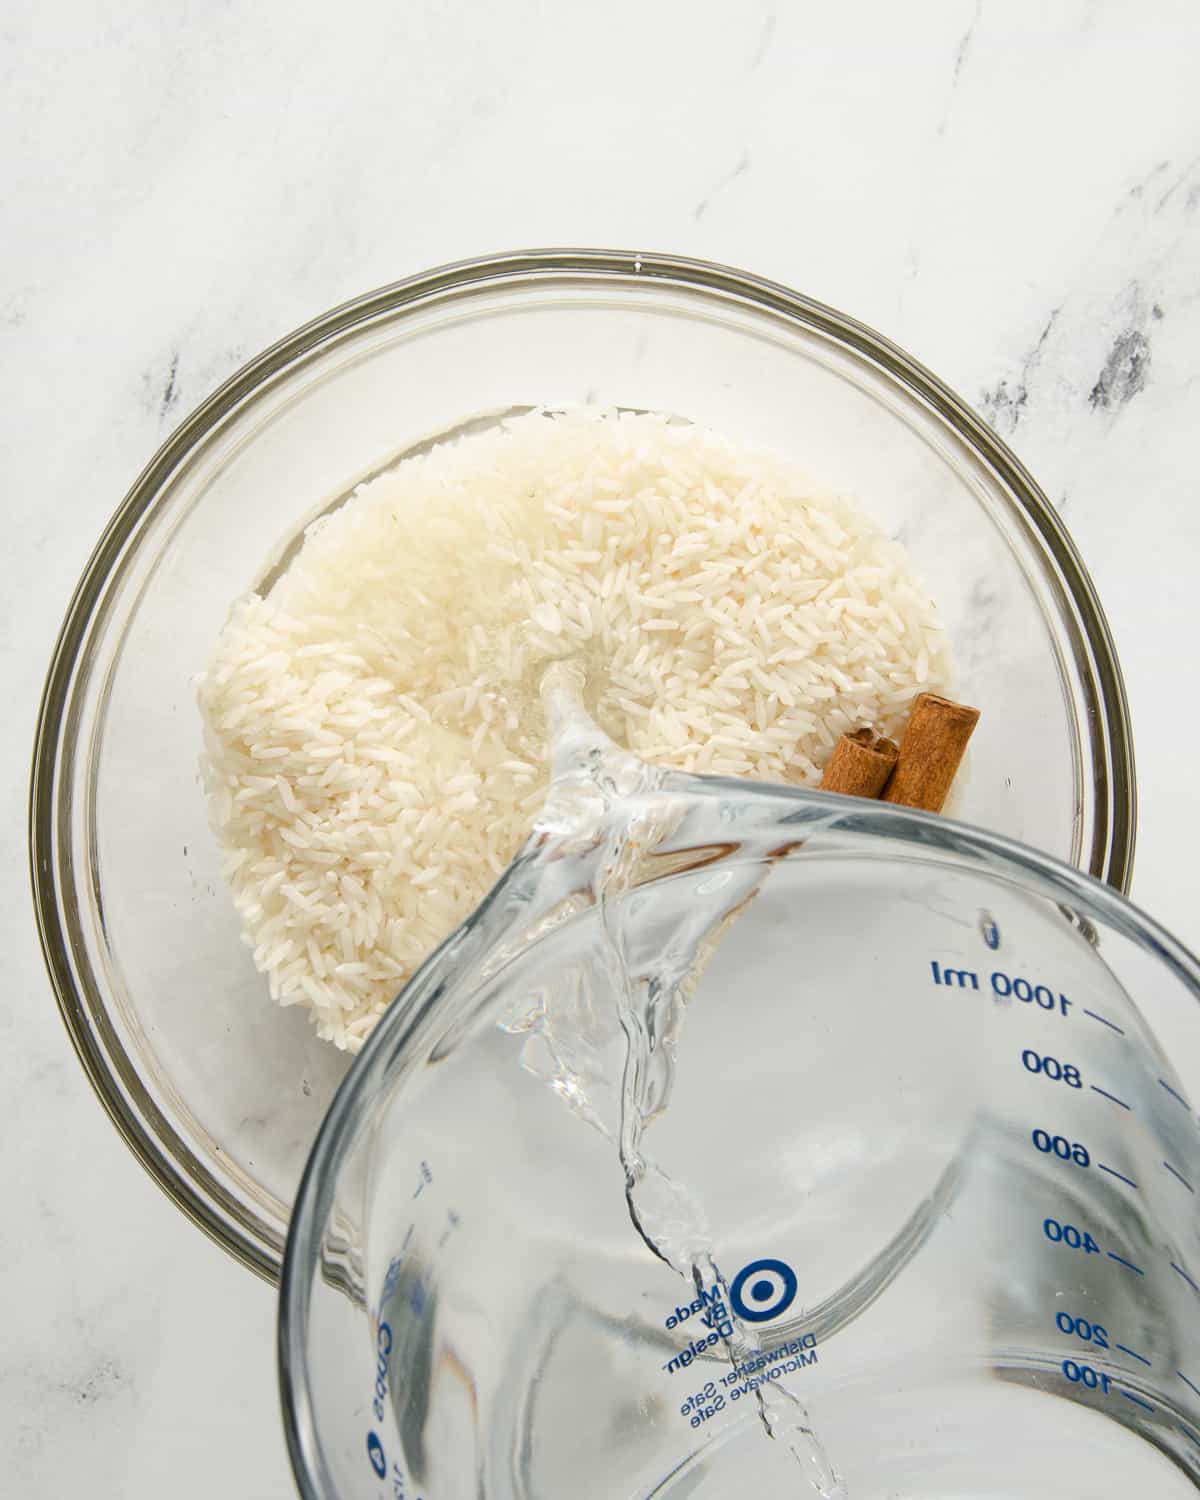 Water being poured into a glass bowl with rice and cinnamon sticks.